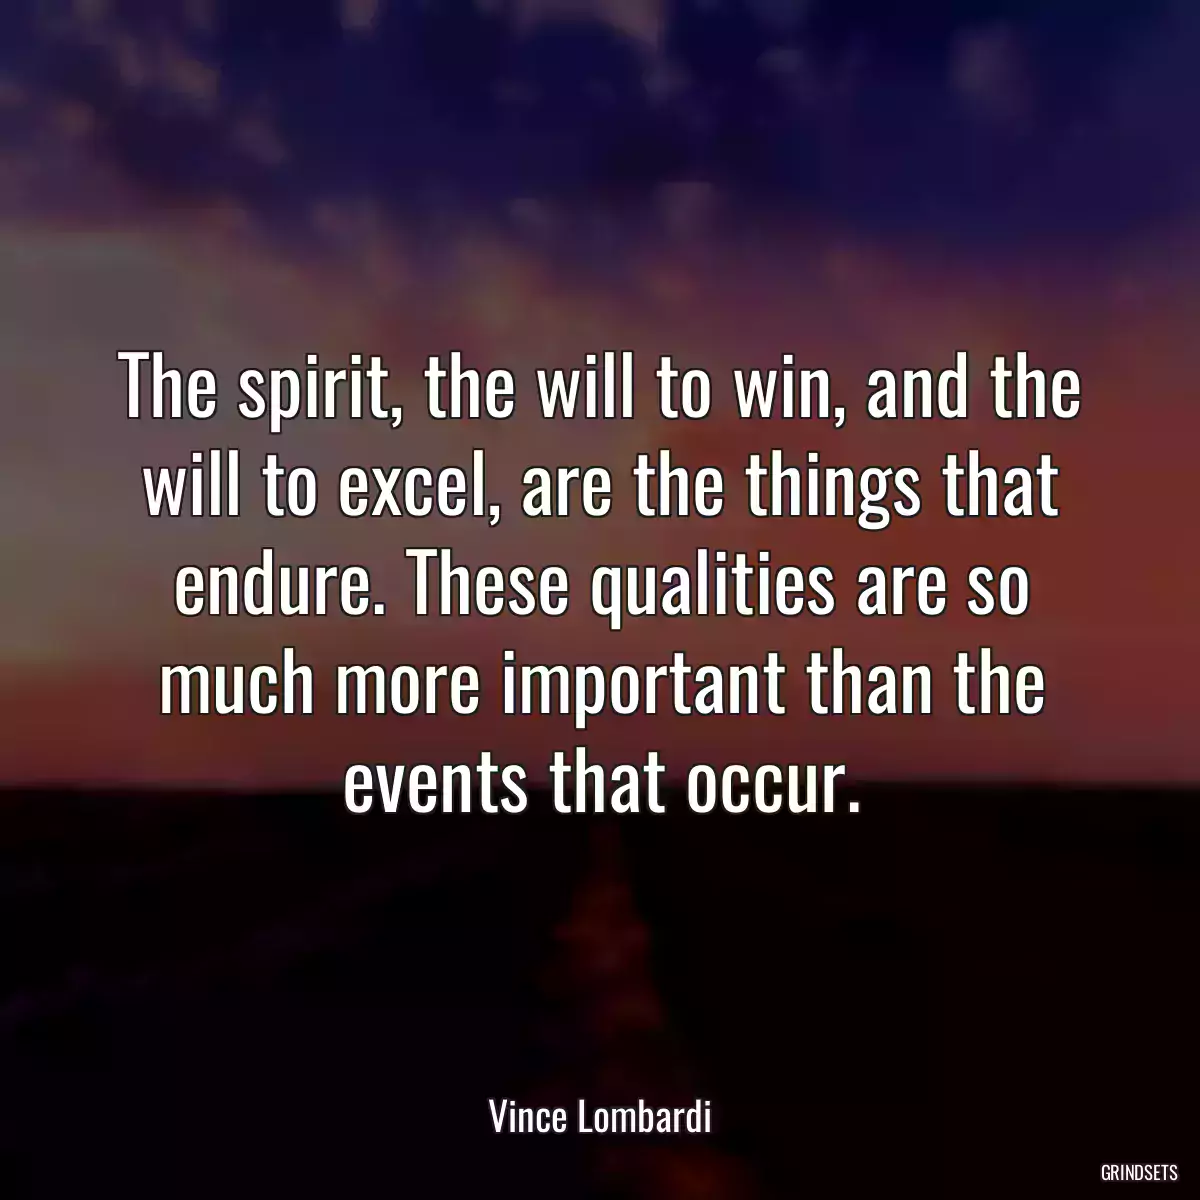 The spirit, the will to win, and the will to excel, are the things that endure. These qualities are so much more important than the events that occur.